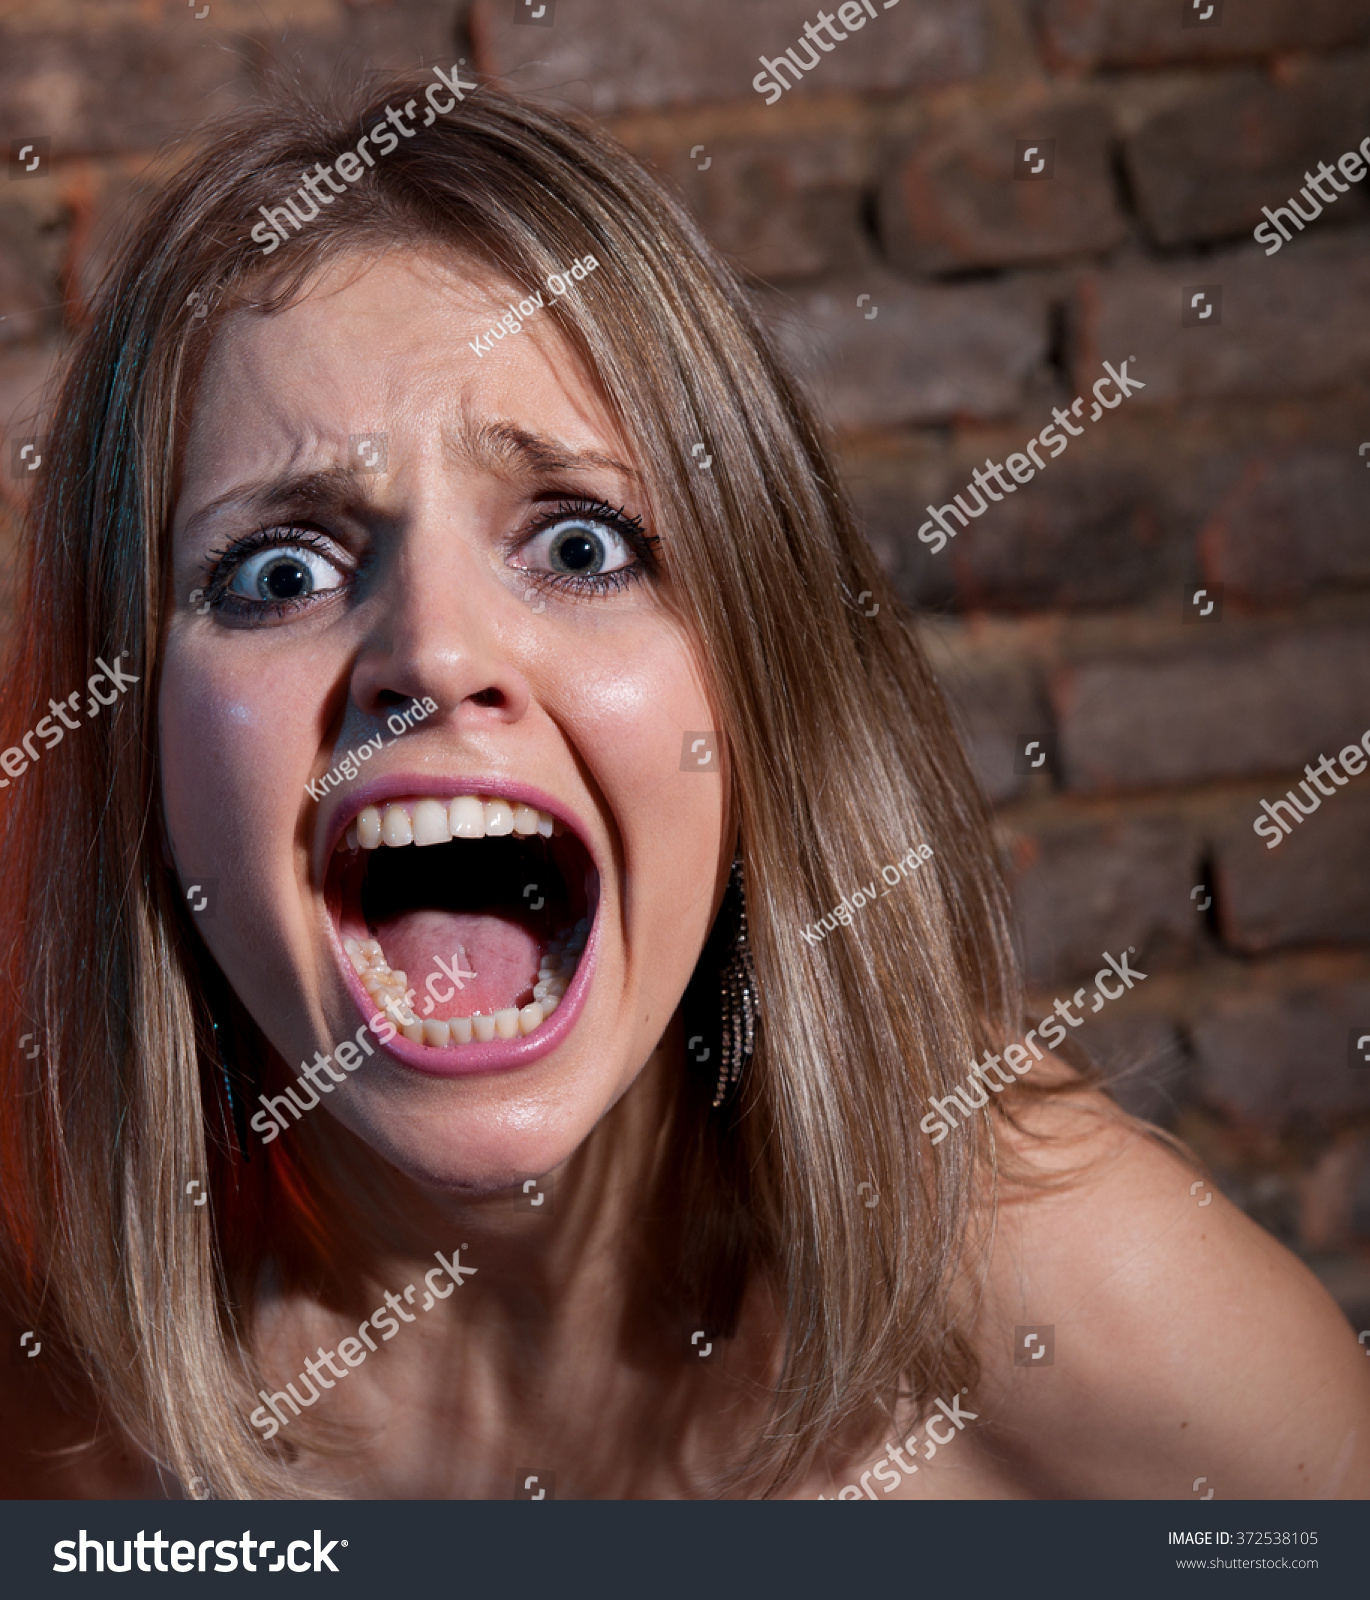 Woman Screaming In Terror On The Brick Wall Background Stock Photo